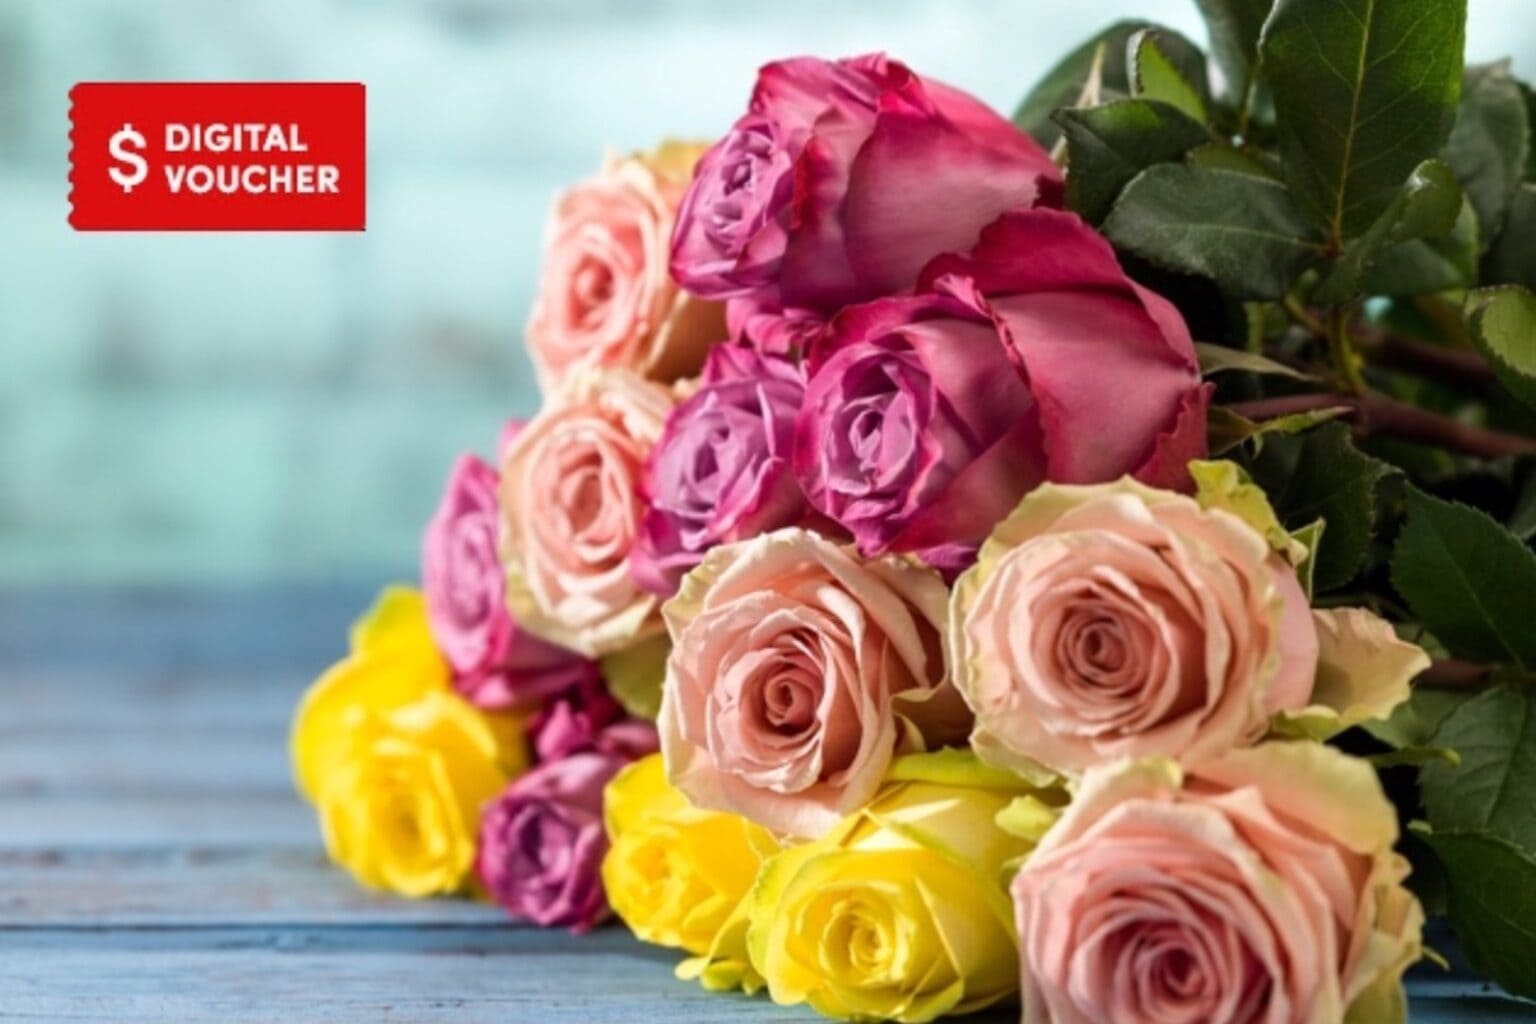 Gift your Valentine 2 dozen roses this holiday without breaking the bank.